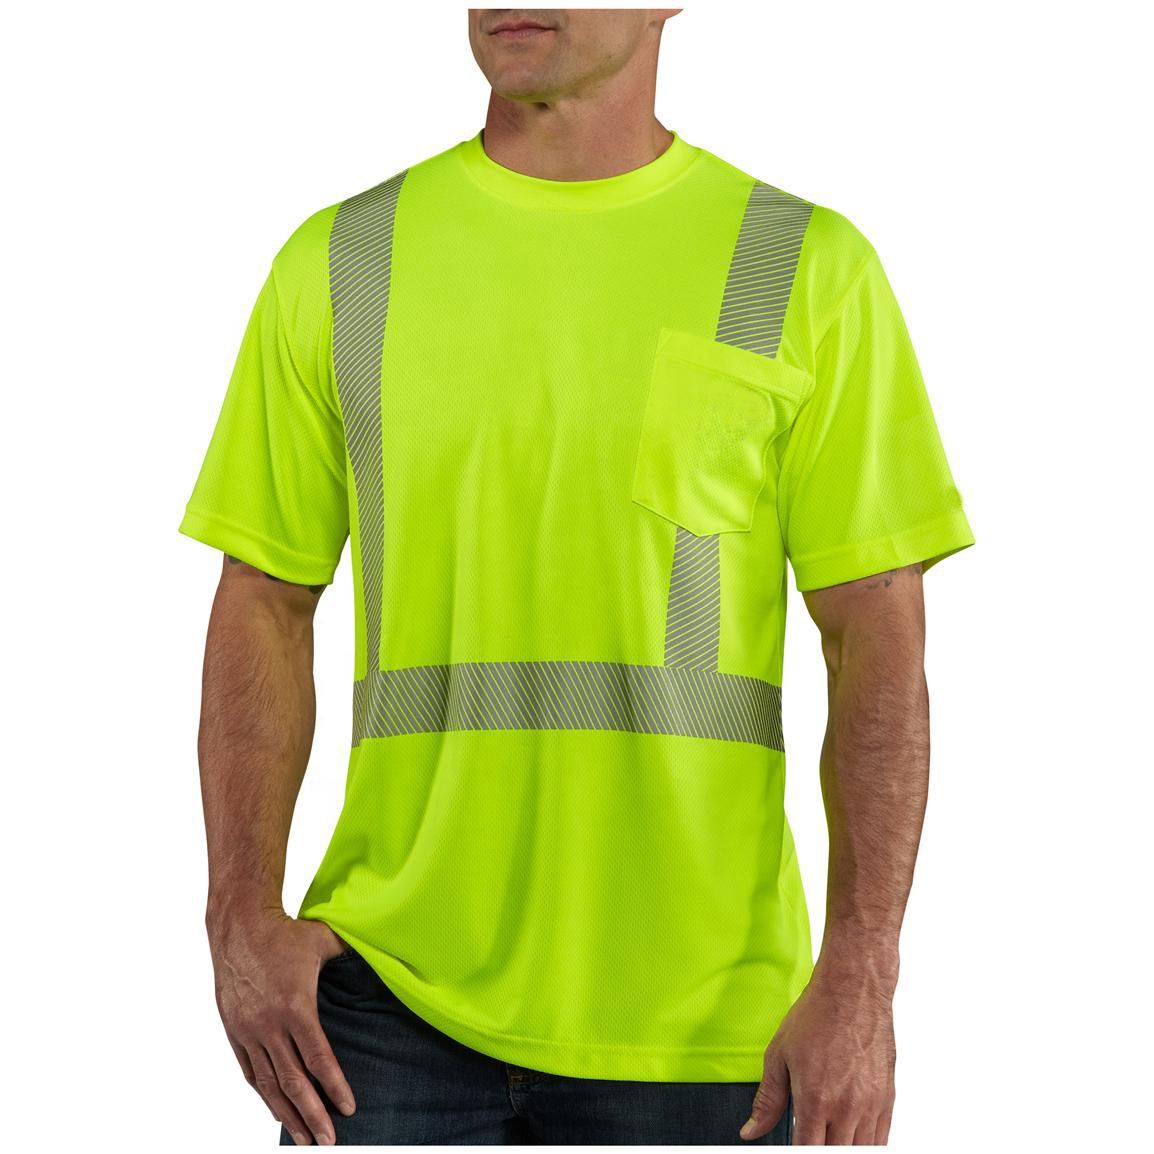 Bulk Sale Safety Reflective Clothing Worker's Clothes Summer Fast Dry Sports Plus Size Men's T-shirts Hi Vis Reflective Stripe